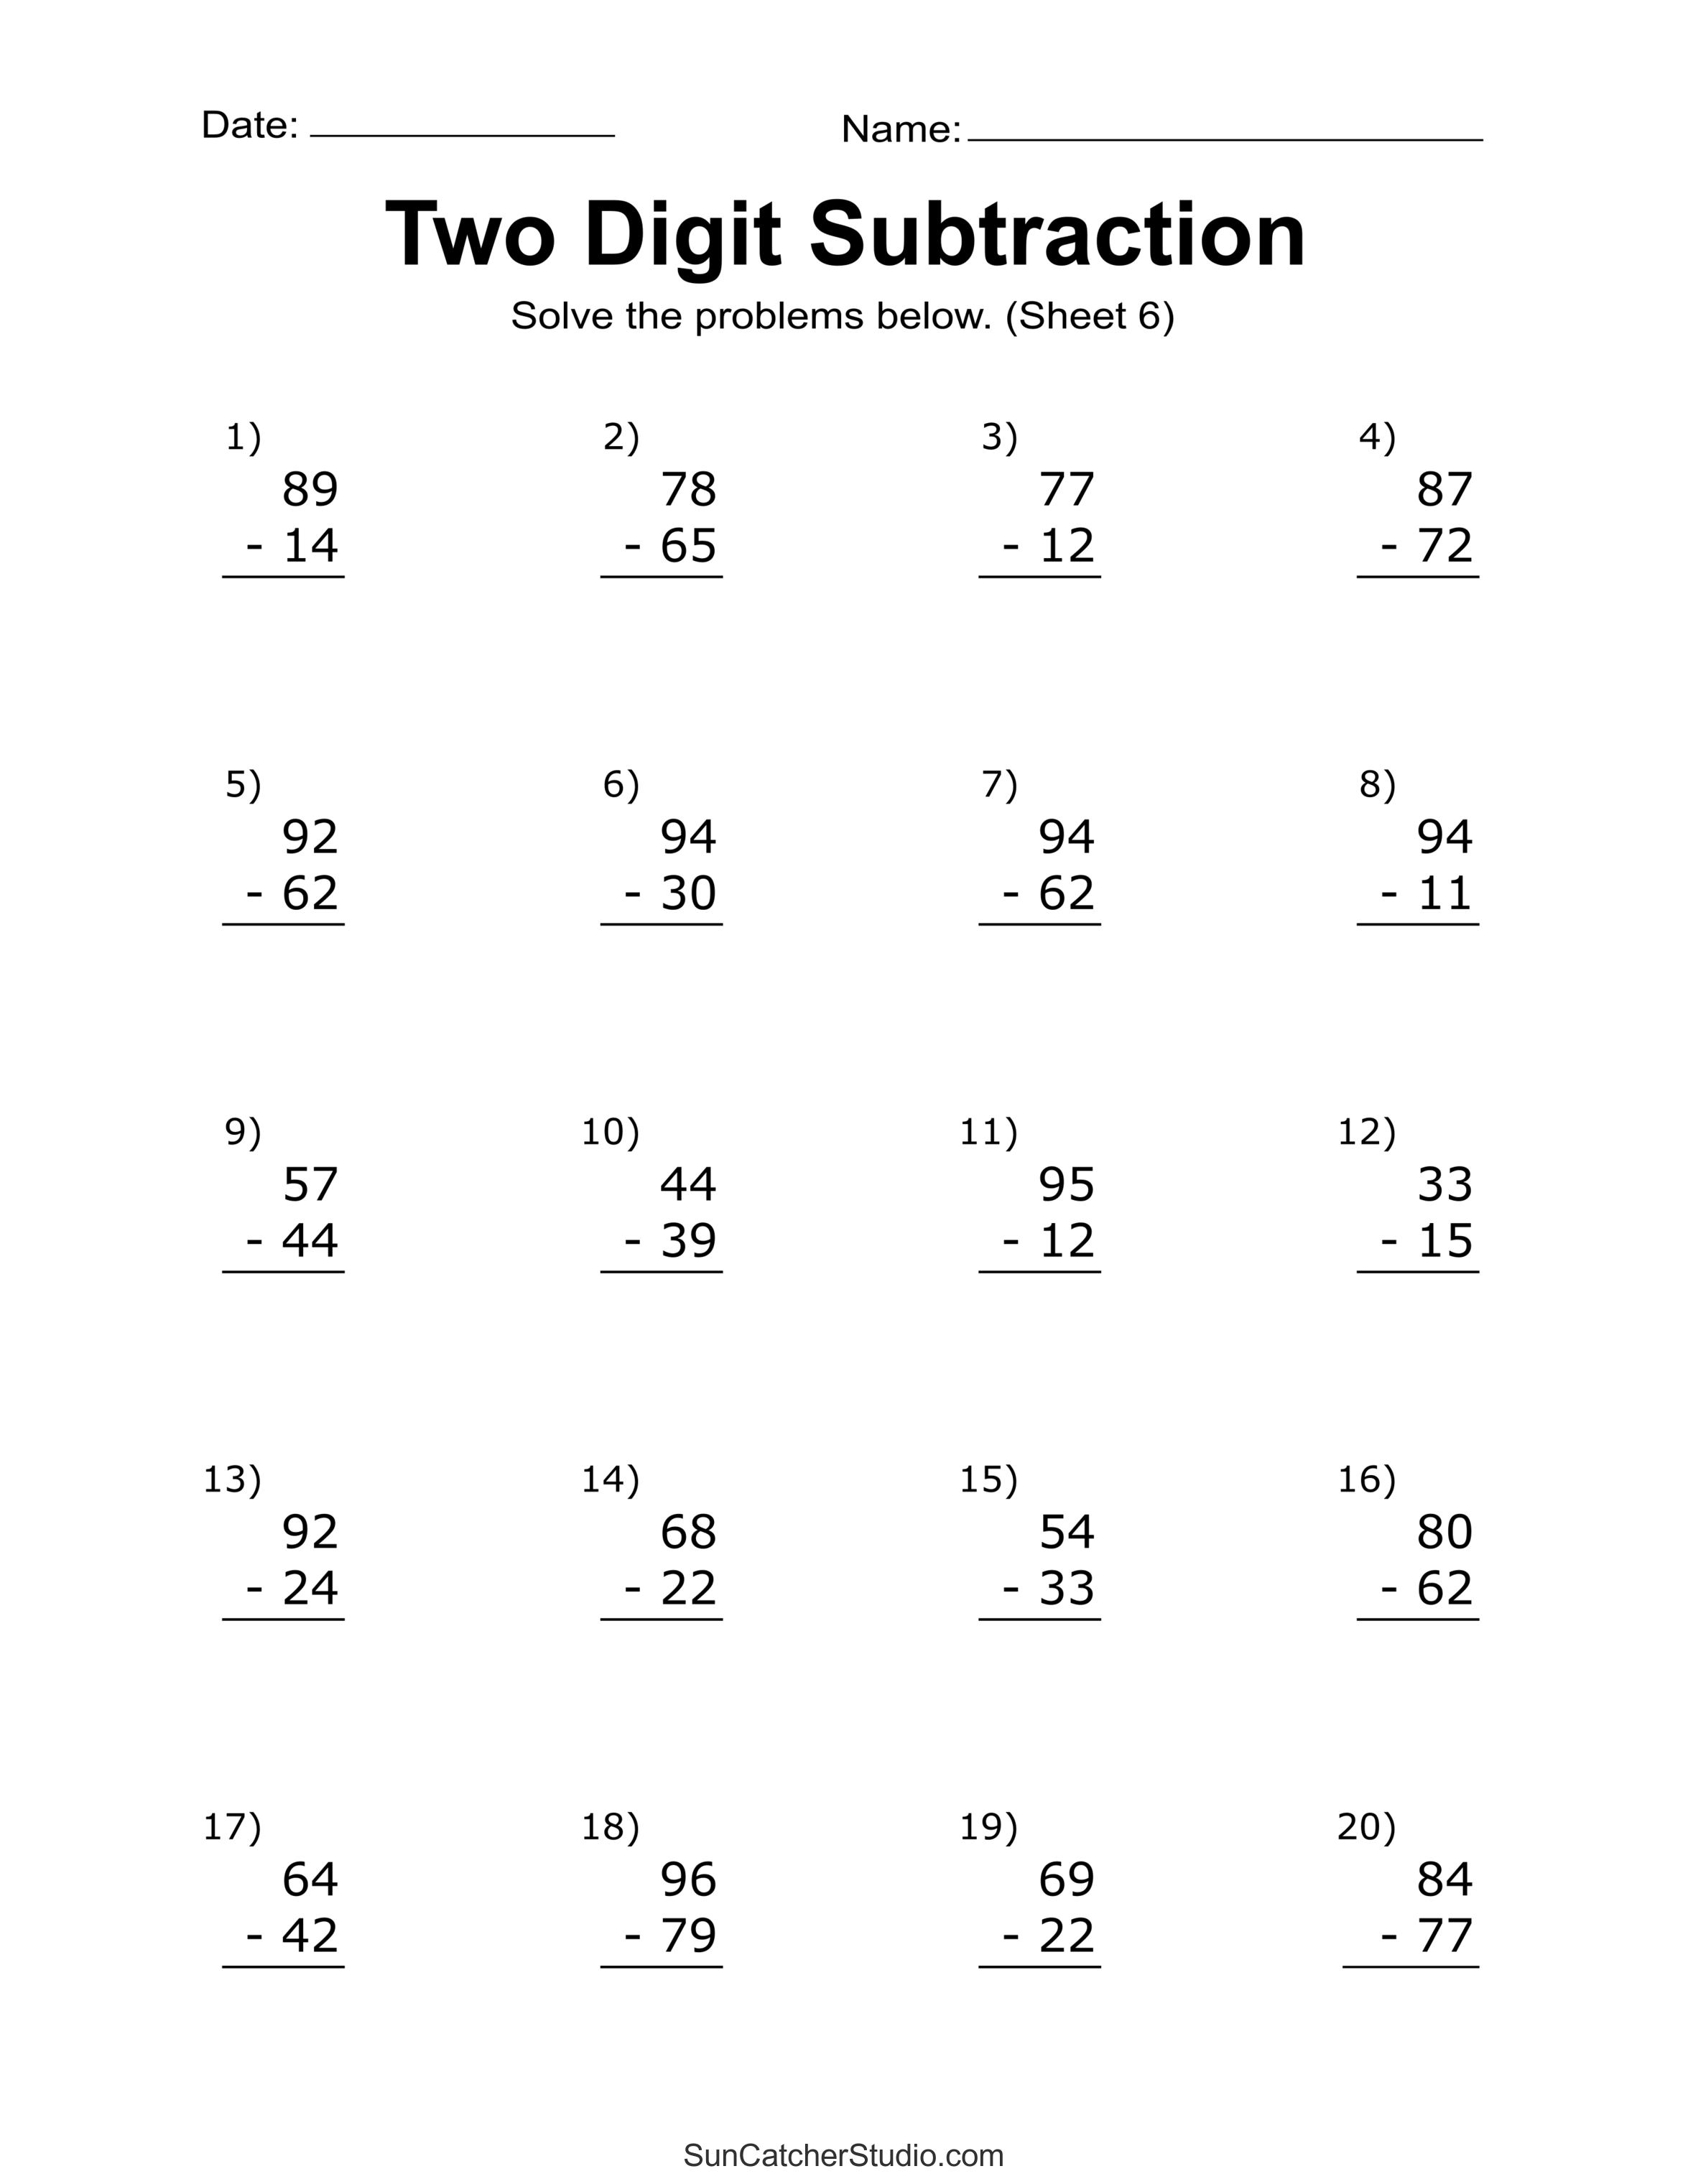 two-digit-subtraction-worksheets-printable-math-drills-diy-projects-patterns-monograms